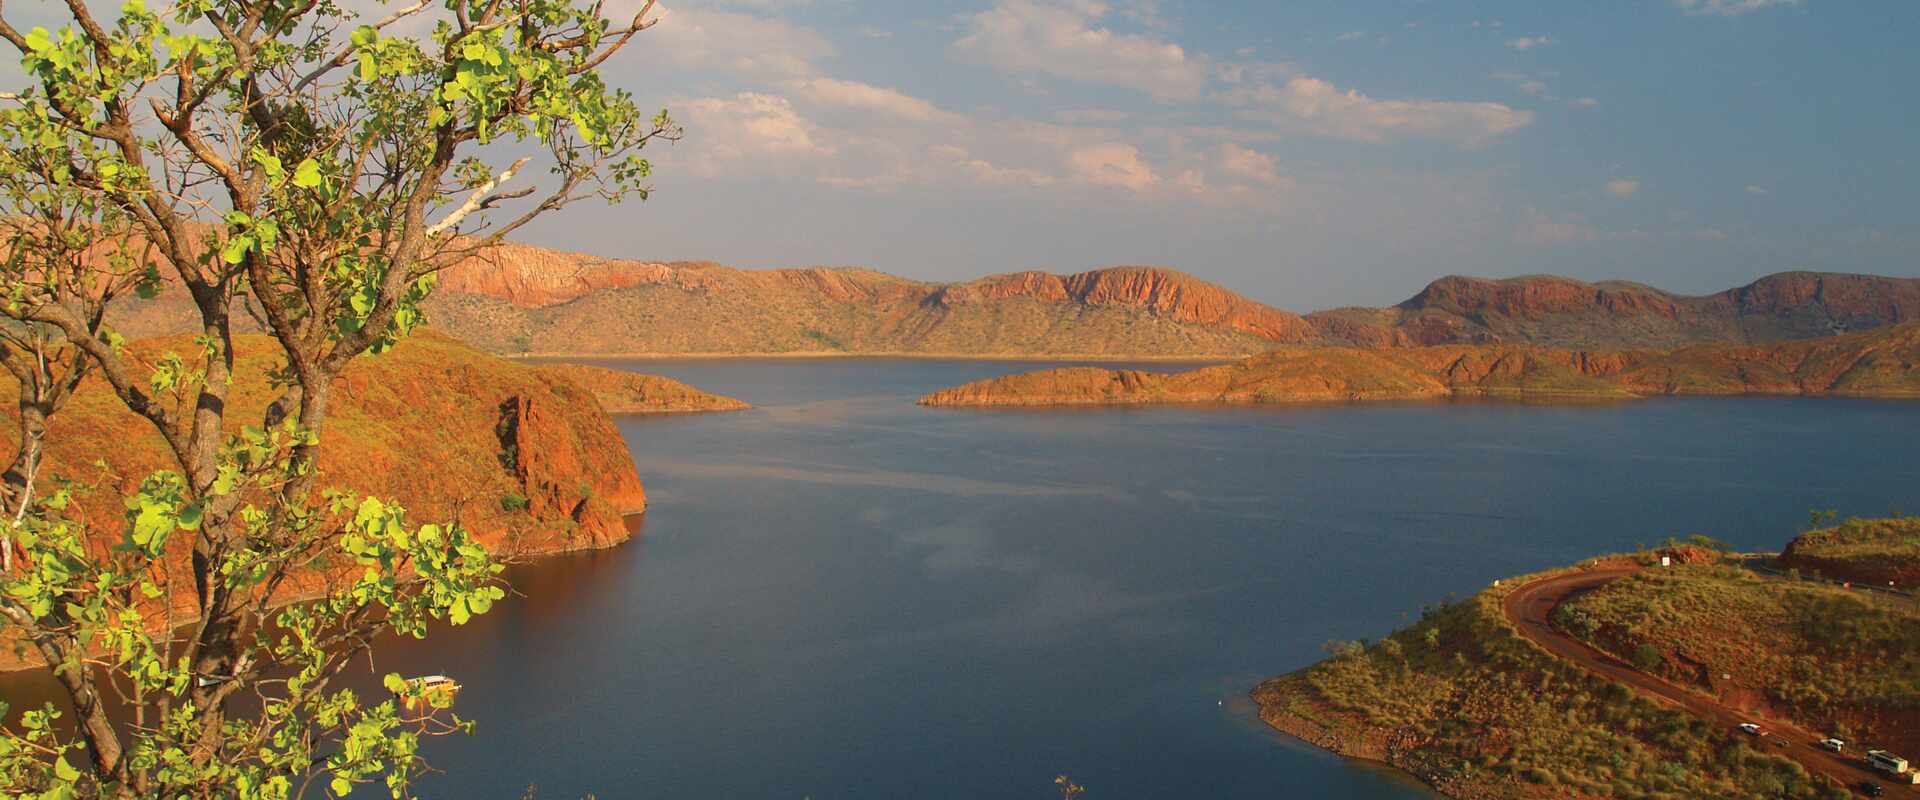 View of blue lake surrounded by orange hills and green tree, Australia